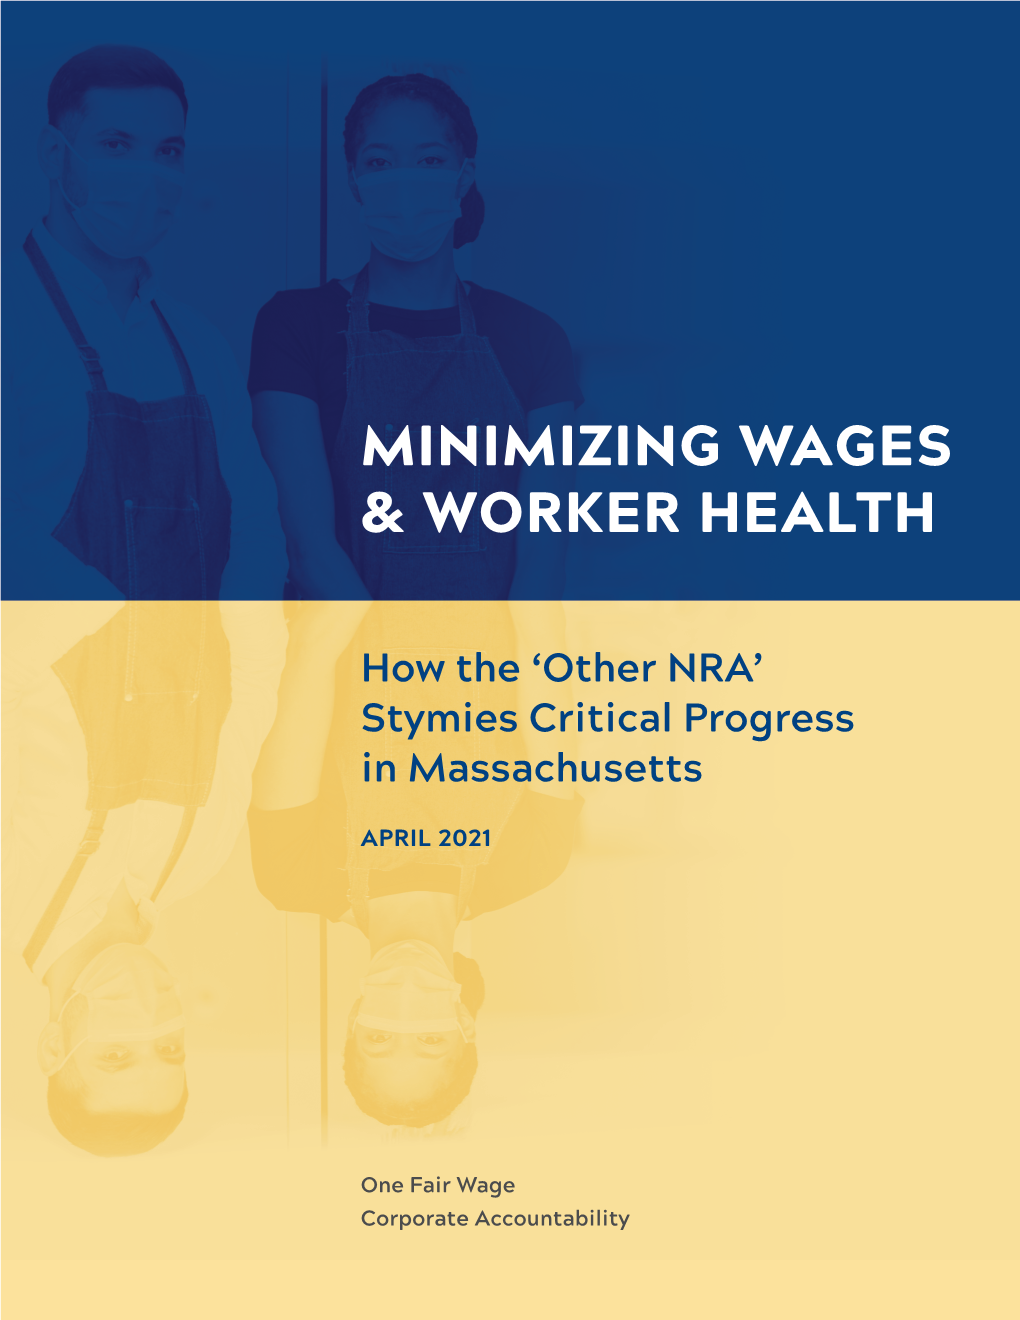 Minimizing Wages & Worker Health